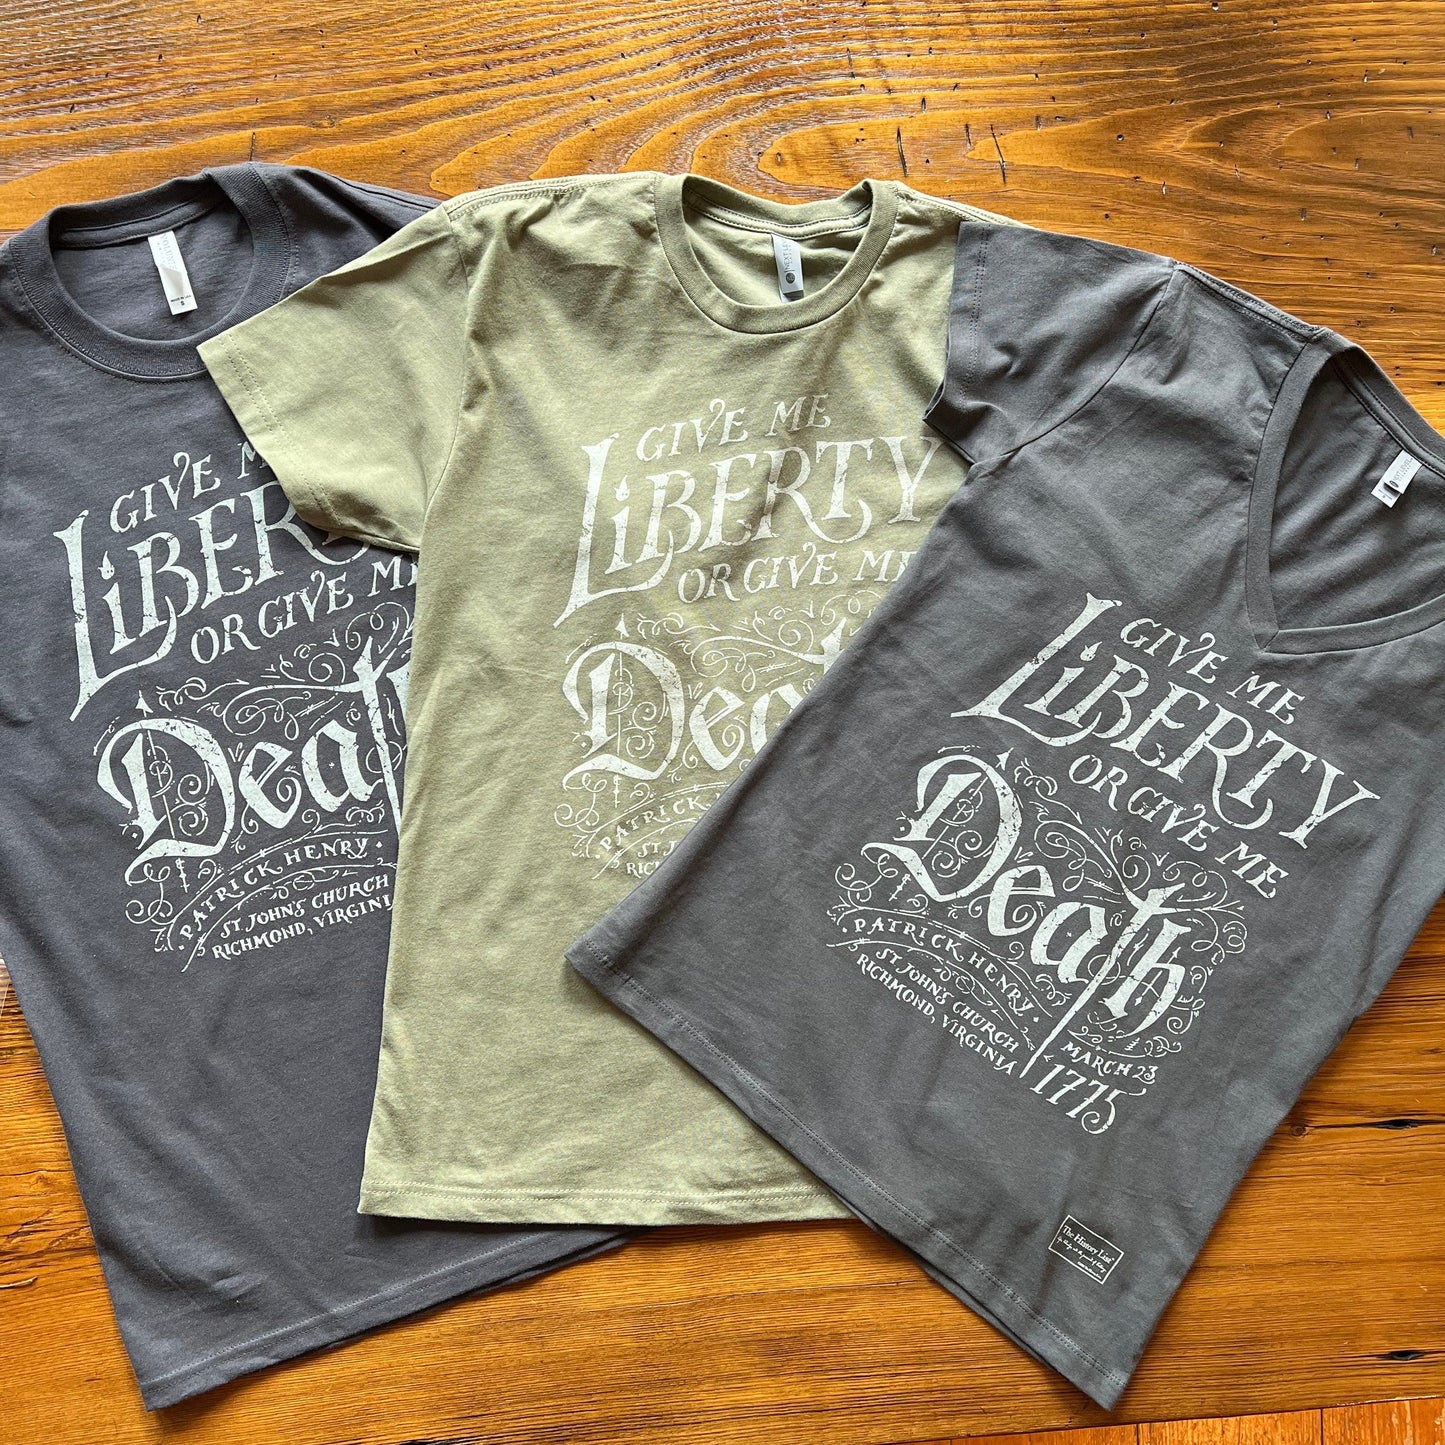 "Give me liberty, or give me death!" Women's v-neck shirt variation from the history list store